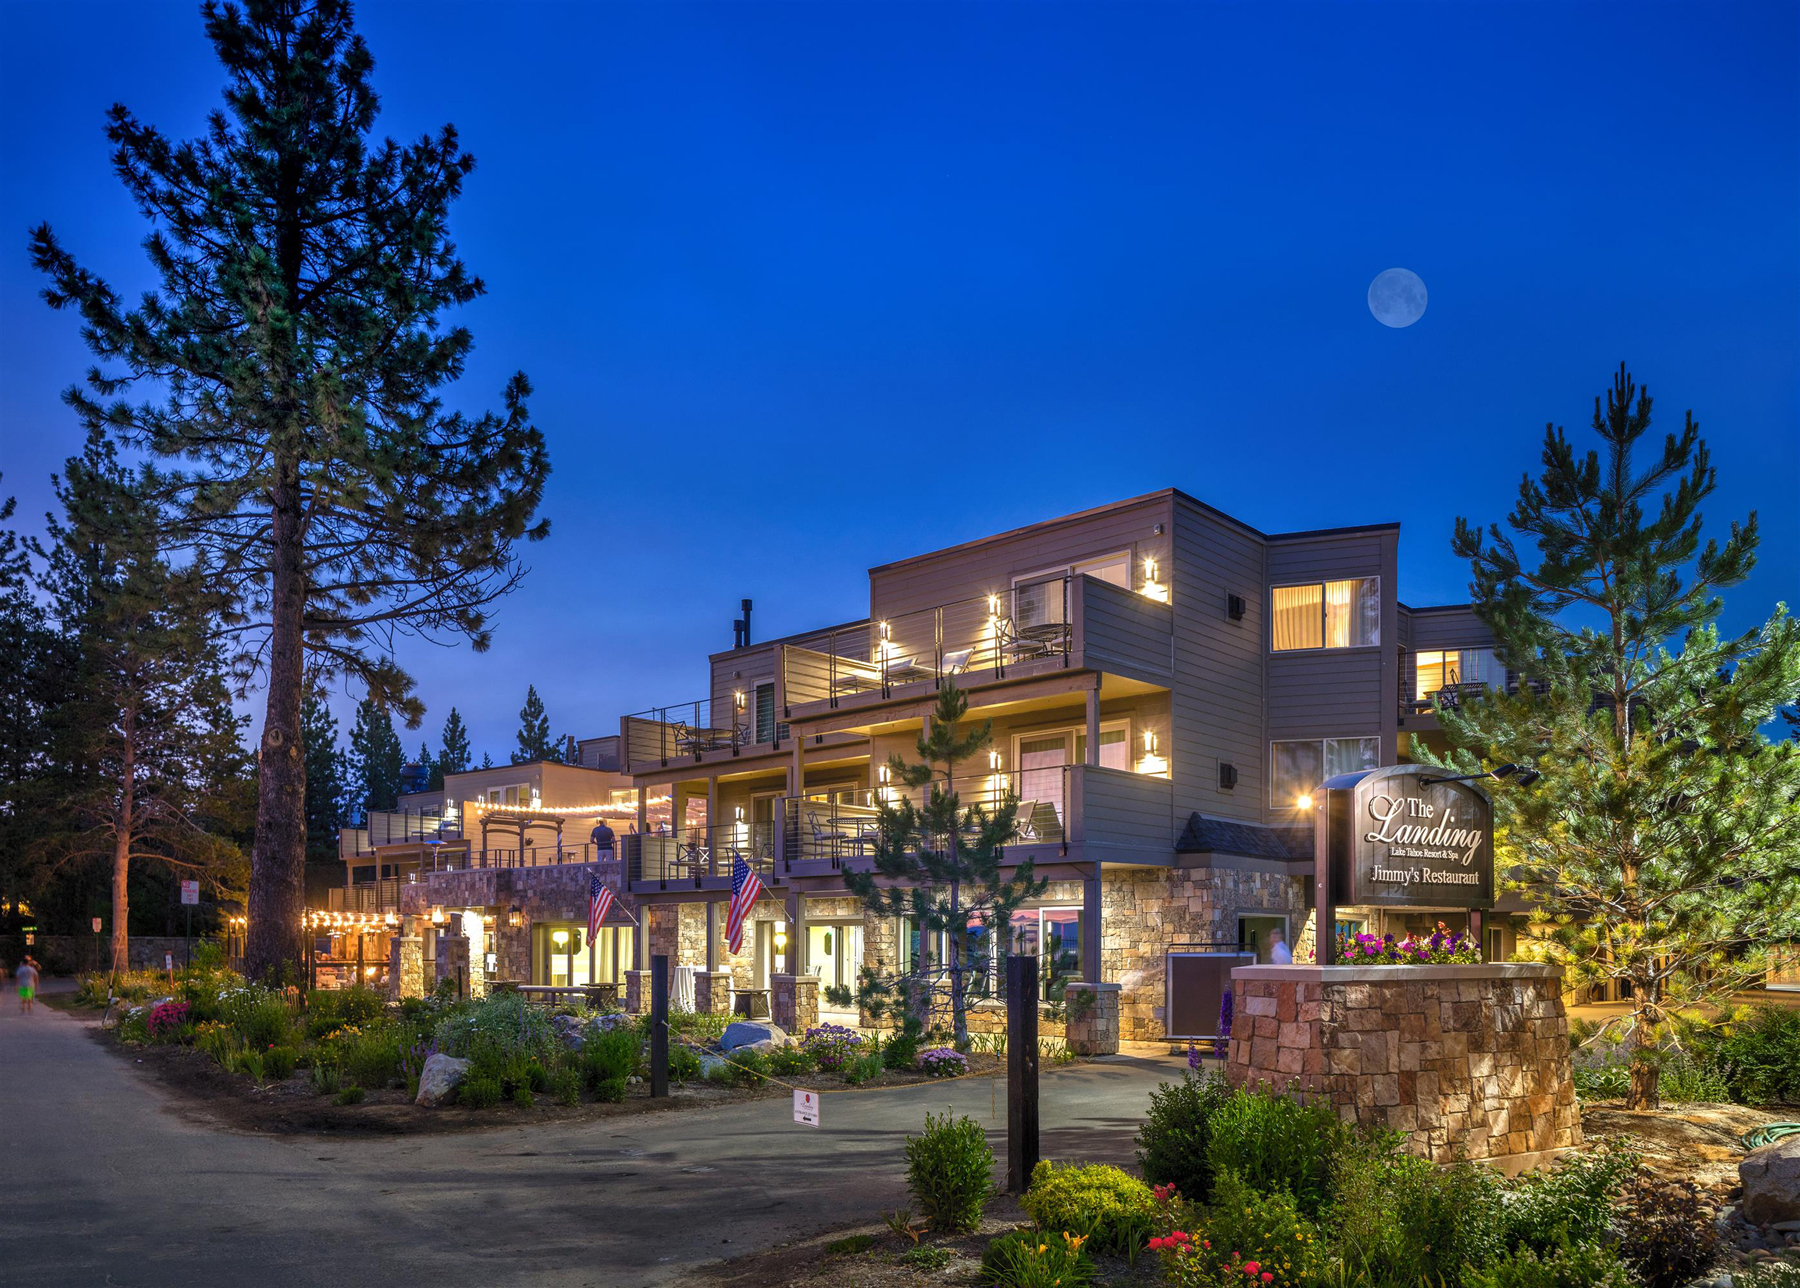 The Landing Resort & Spa, Lake Tahoe’s only five-star boutique lakeside resort, is acclaimed for its romantic setting and multiple luxurious venues and services to create a special wedding.